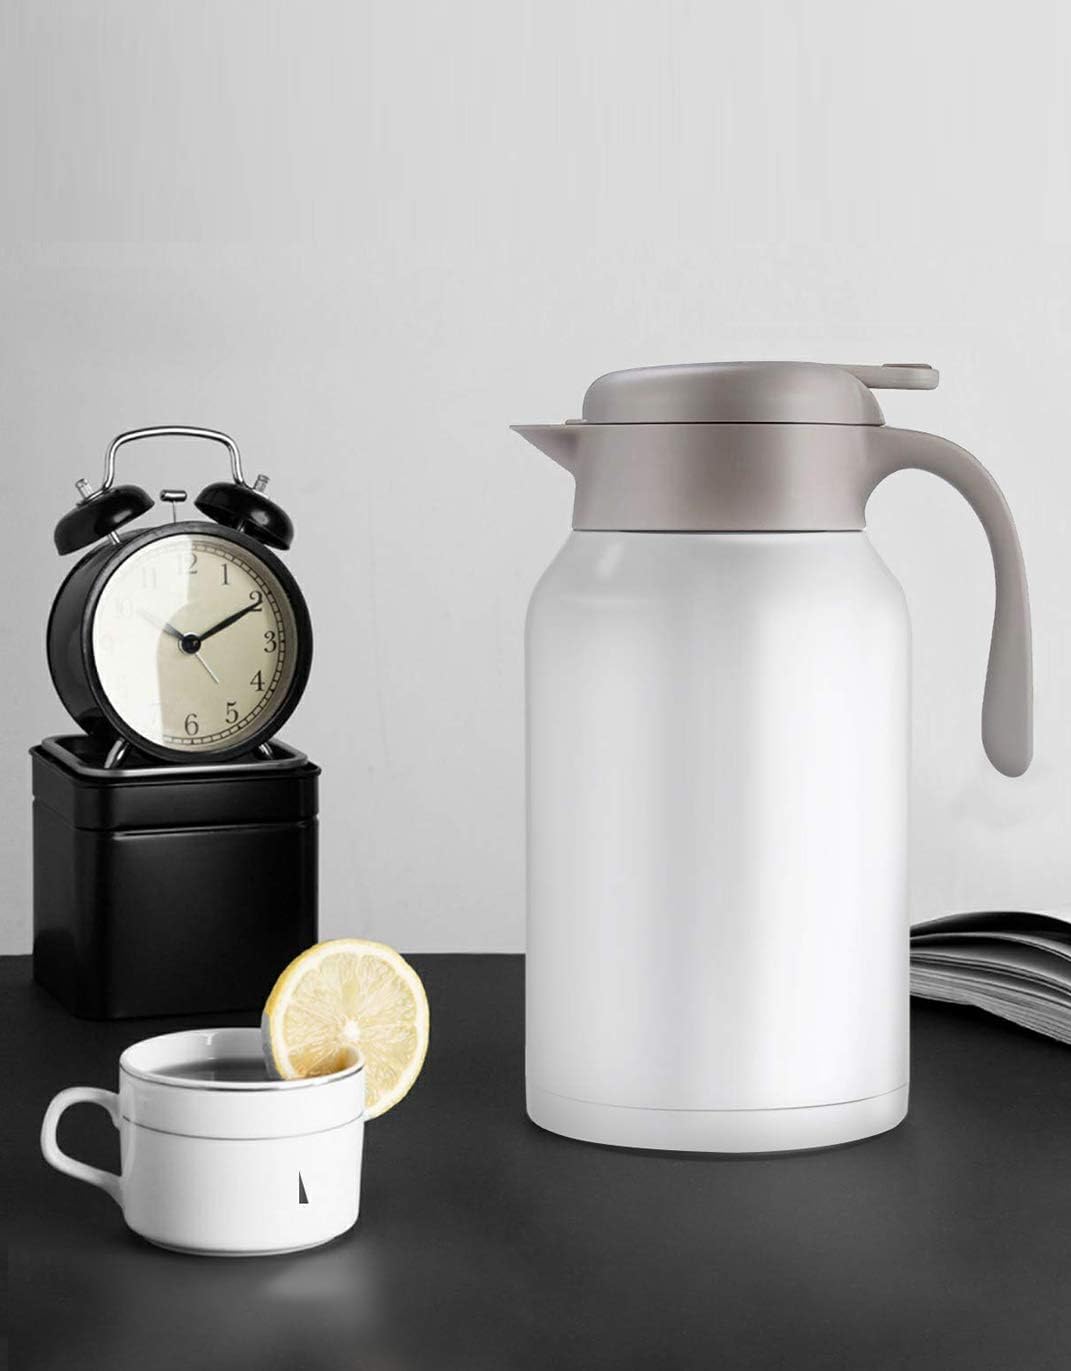 68oz Coffee Carafe 18/10 Stainless Steel/Double Walled Vacuum